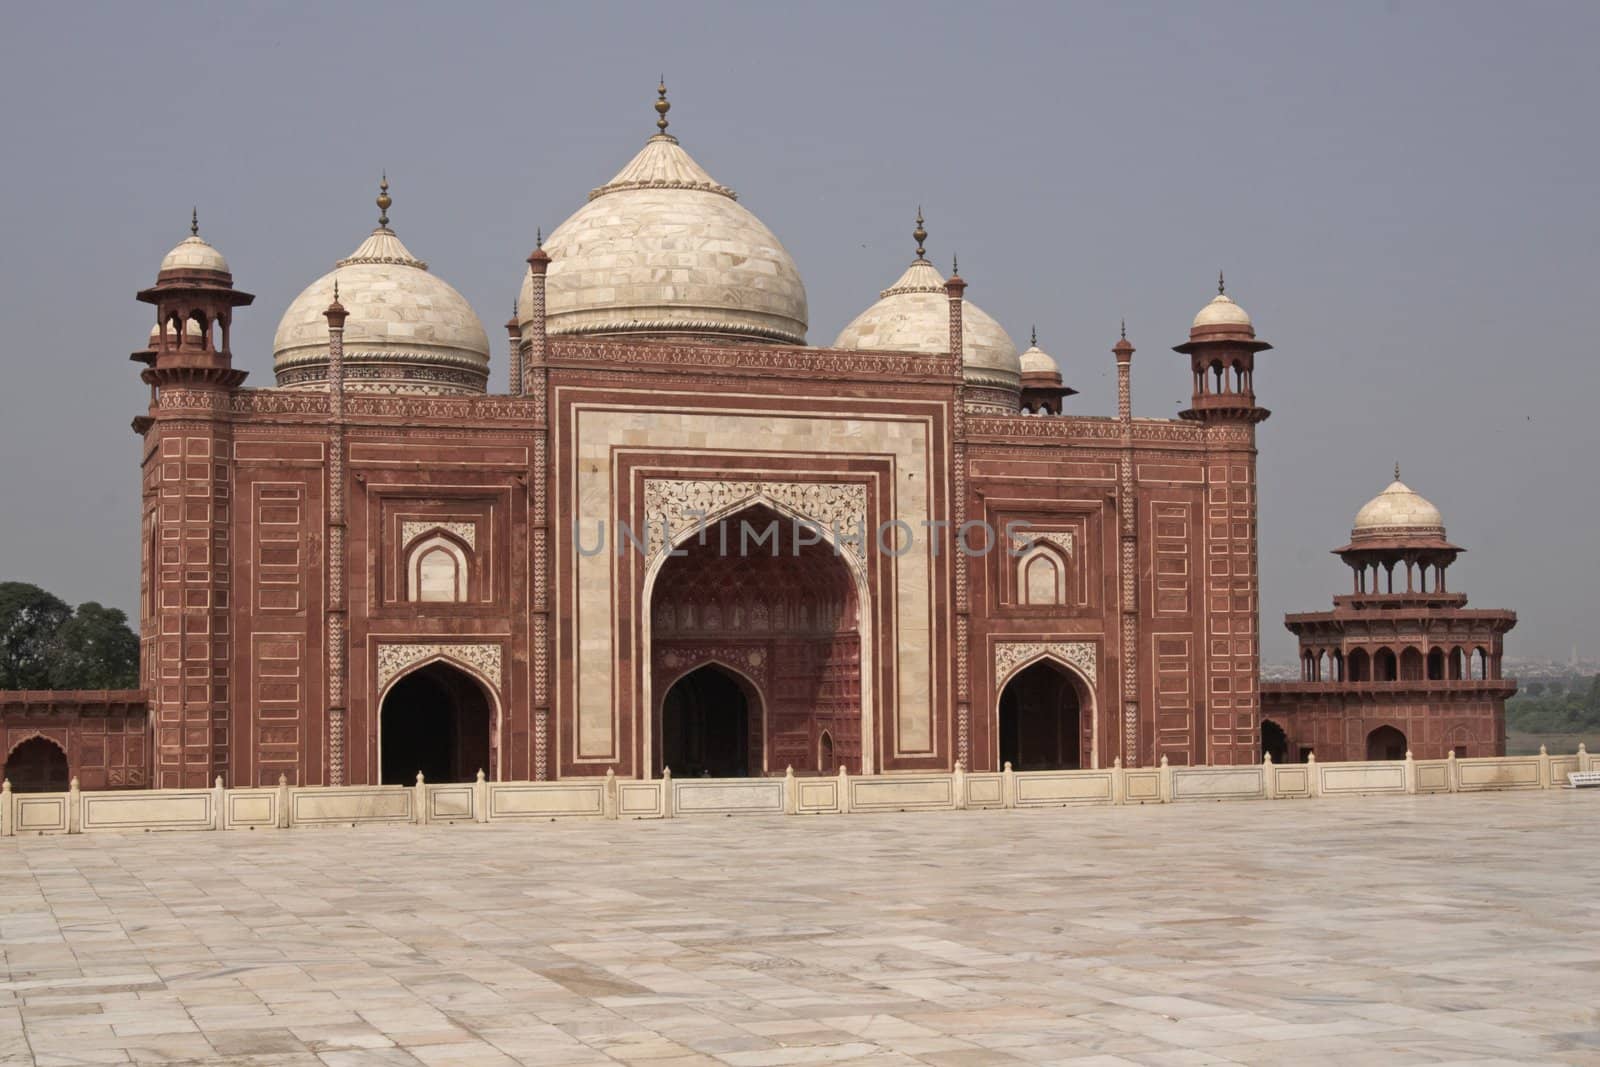 Mosque at the Taj Mahal. Mughal style building of red sandstone inlaid with marble. Agra, Uttar Pradesh, India